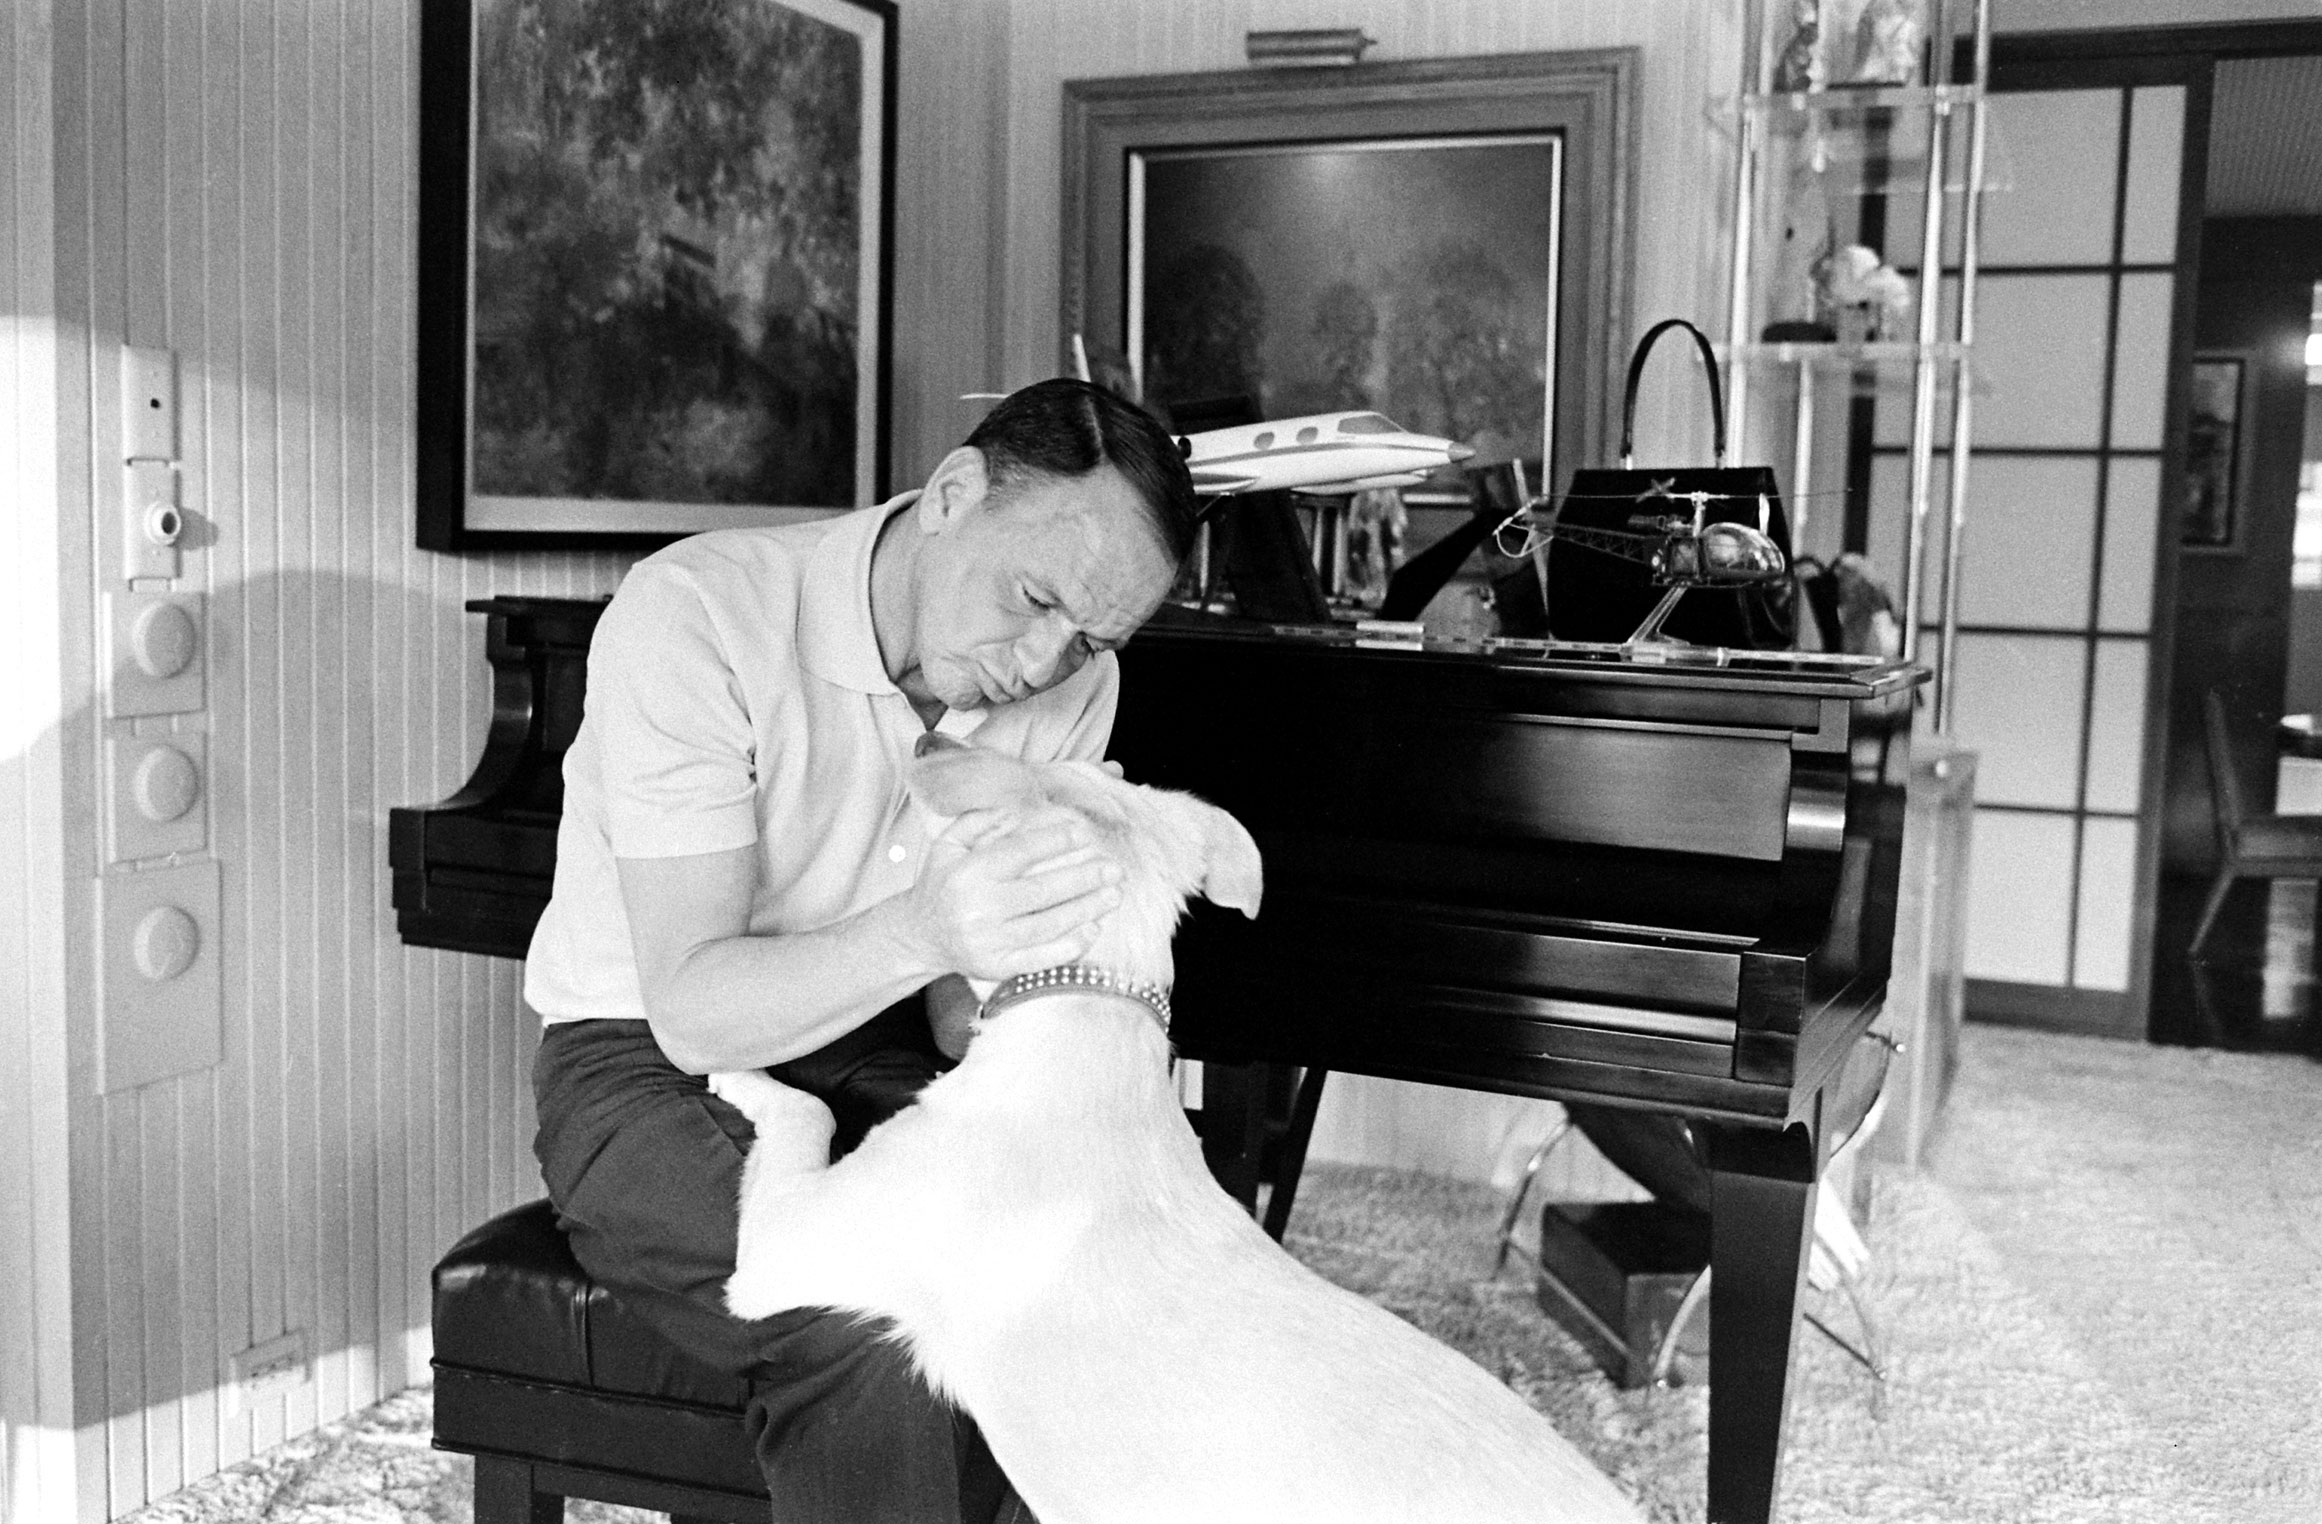 Frank Sinatra and his dog, Ringo, at Sinatra's home in Palm Springs, California, in 1965.